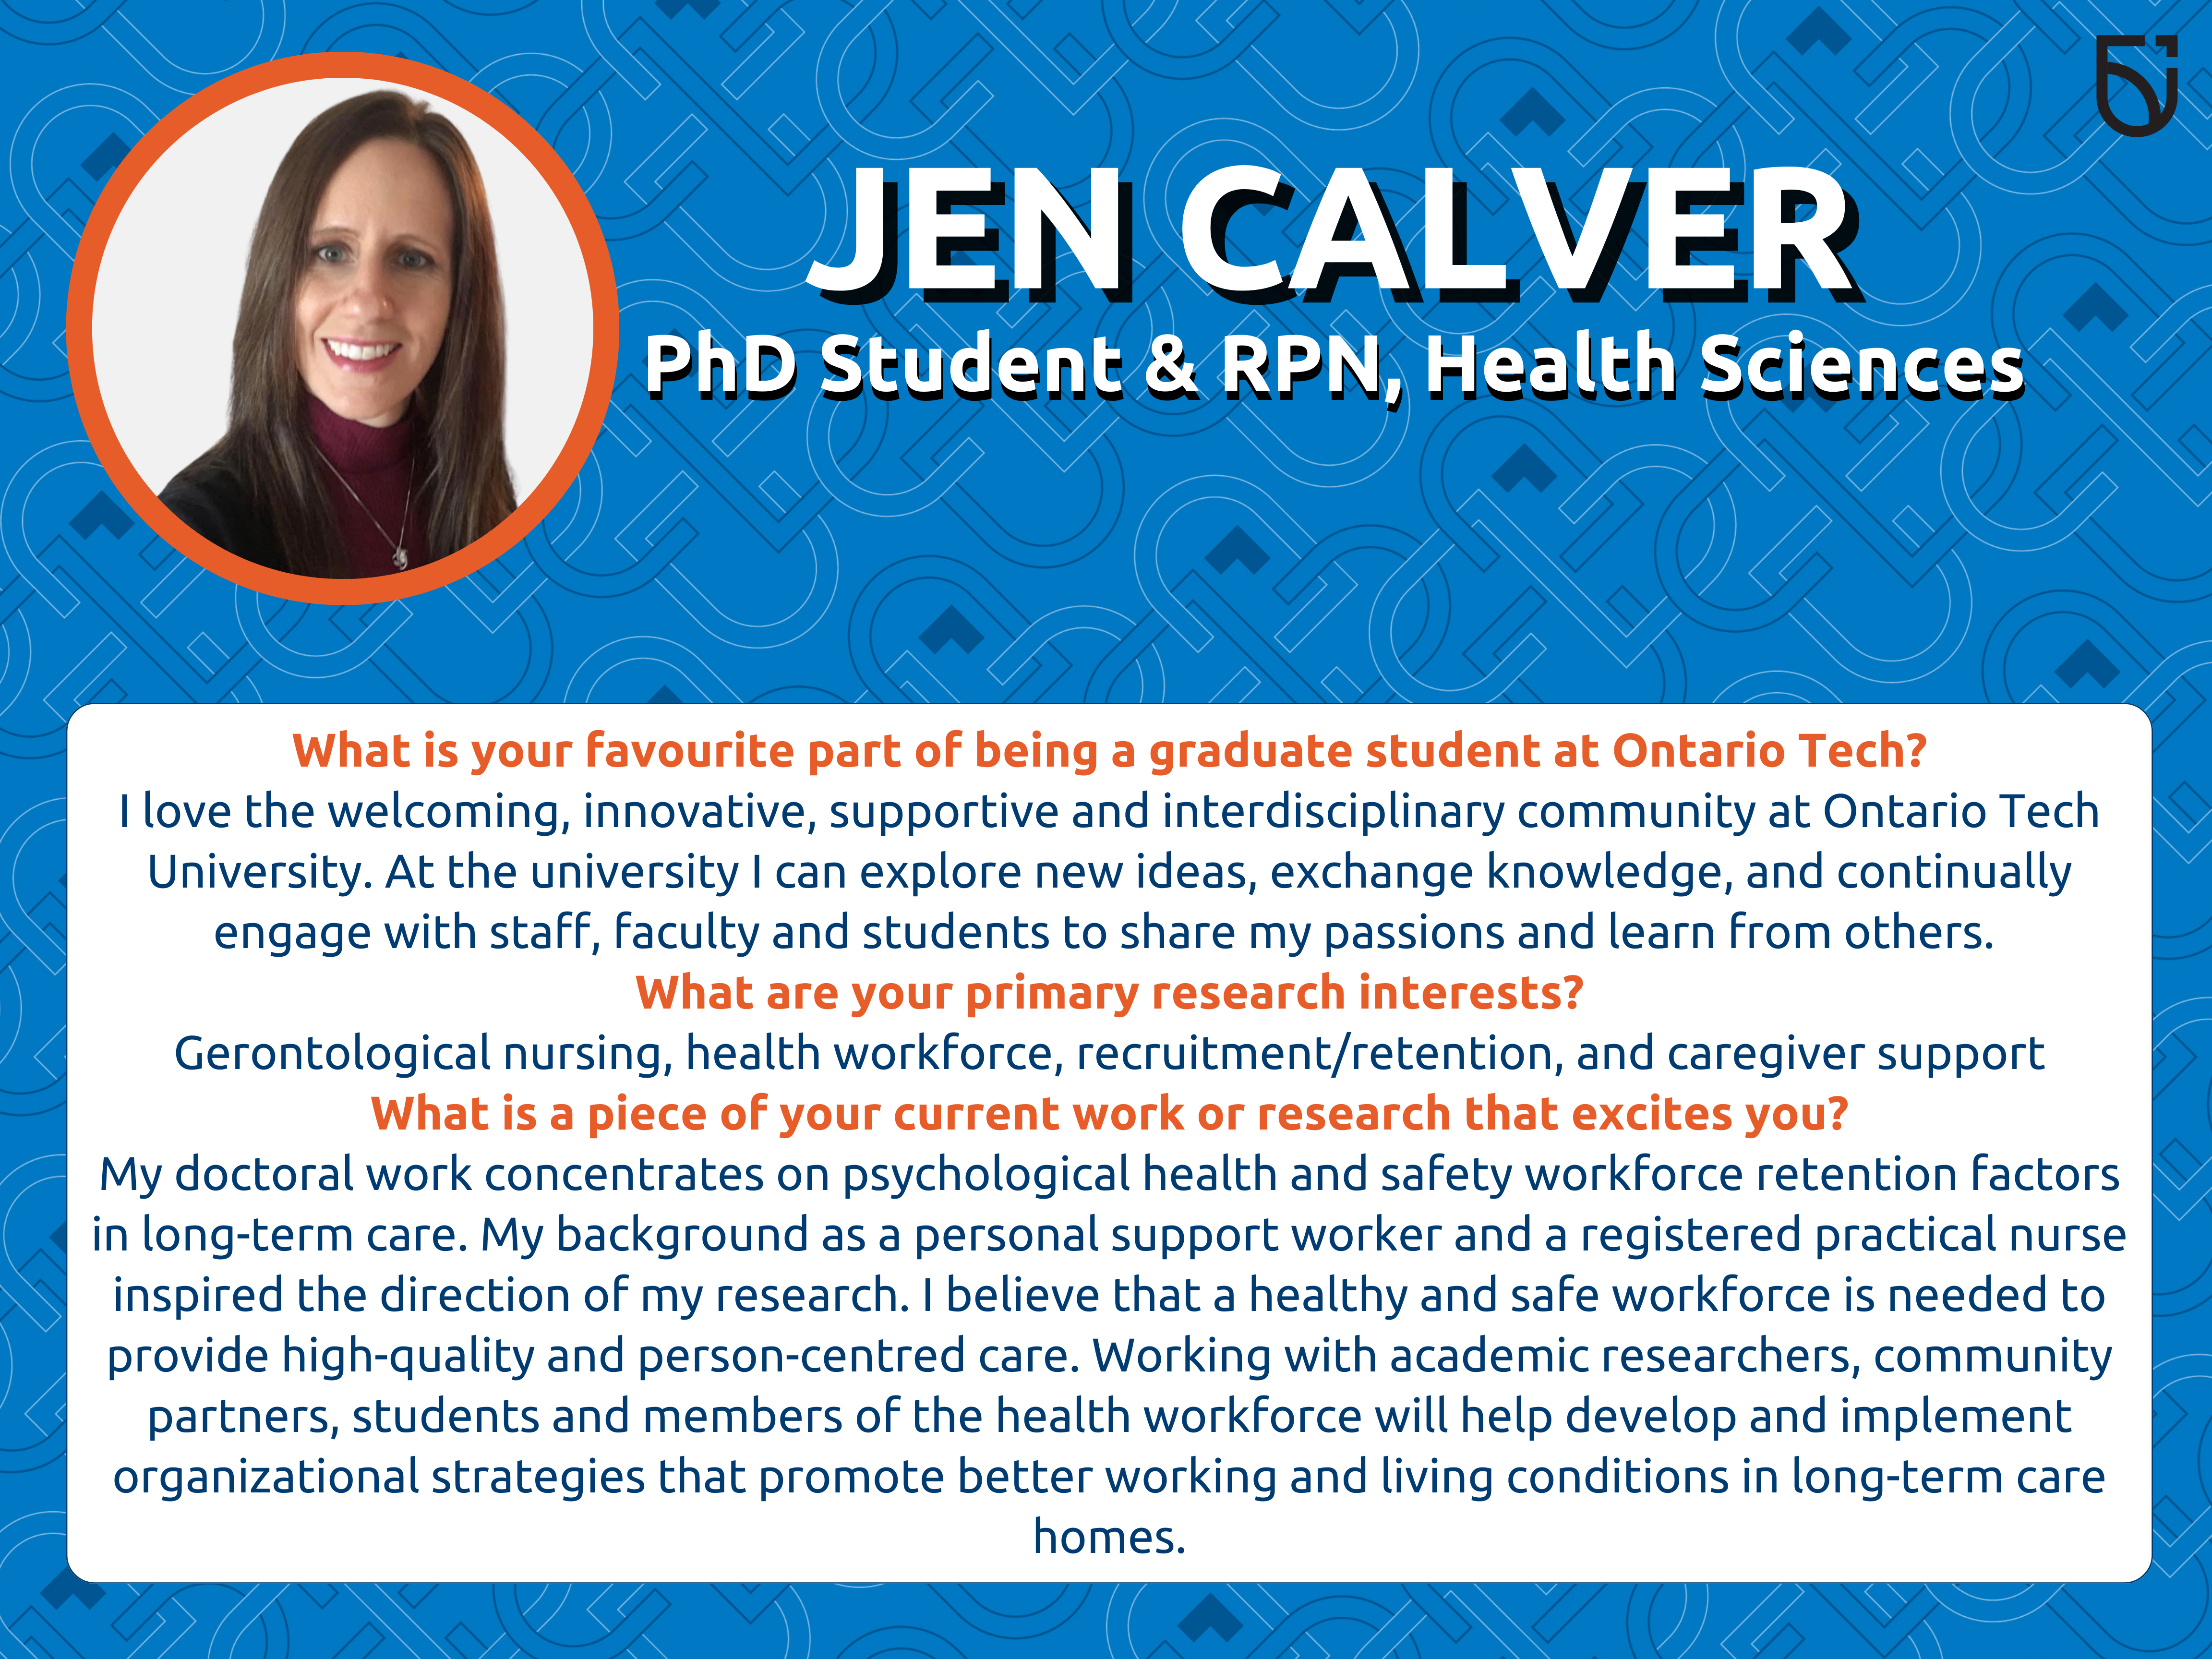 This photo is a Women’s Wednesday feature of Jen Calver, a PhD student in the Faculty of Health Sciences.